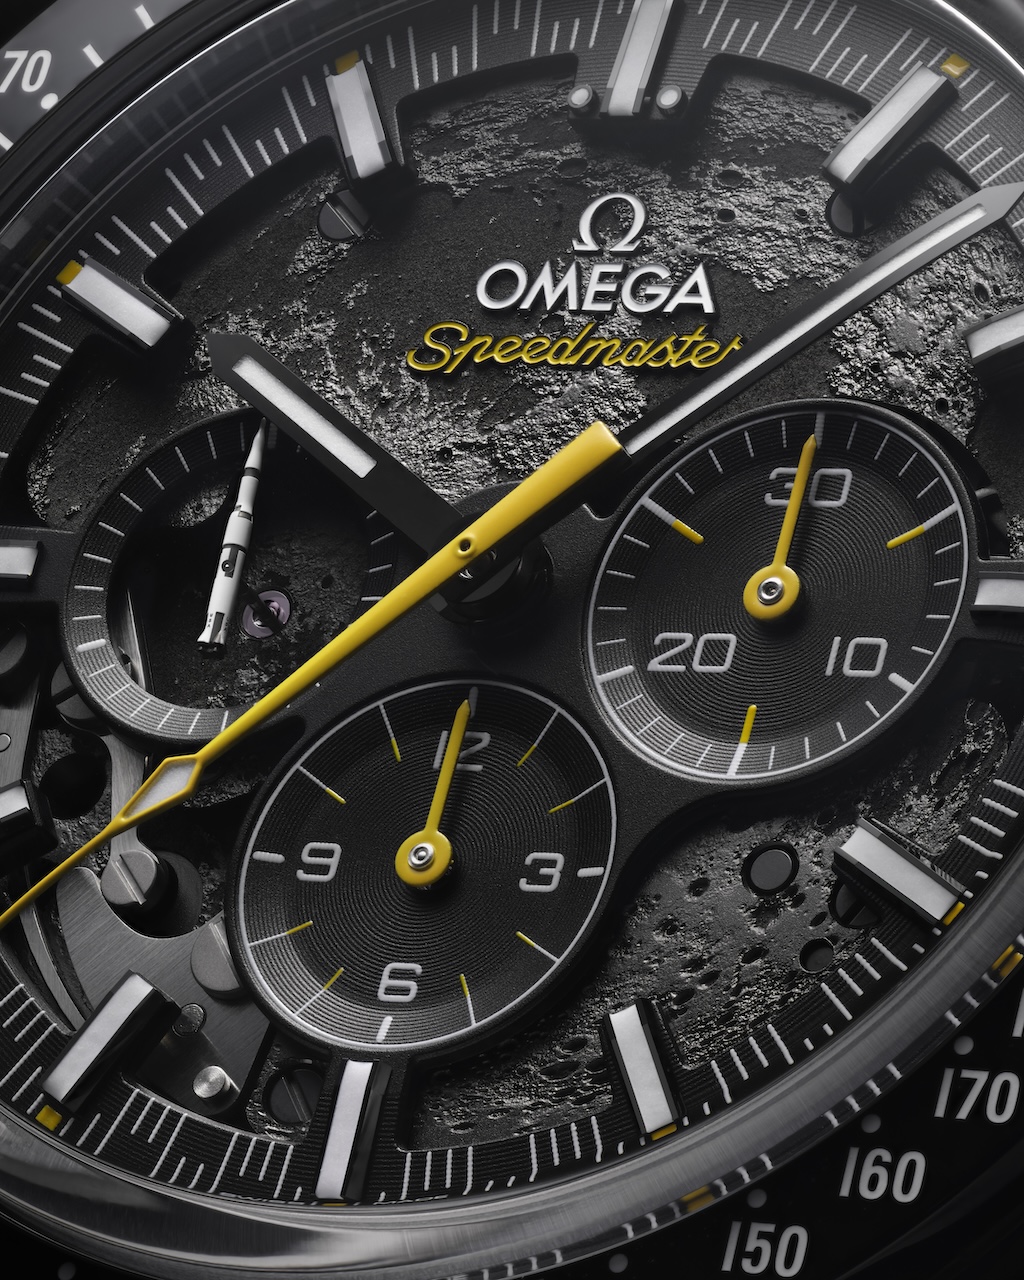 Five years after its initial release, Omega revisits its popular Speedmaster Dark Side of the Moon Apollo 8 timepiece.